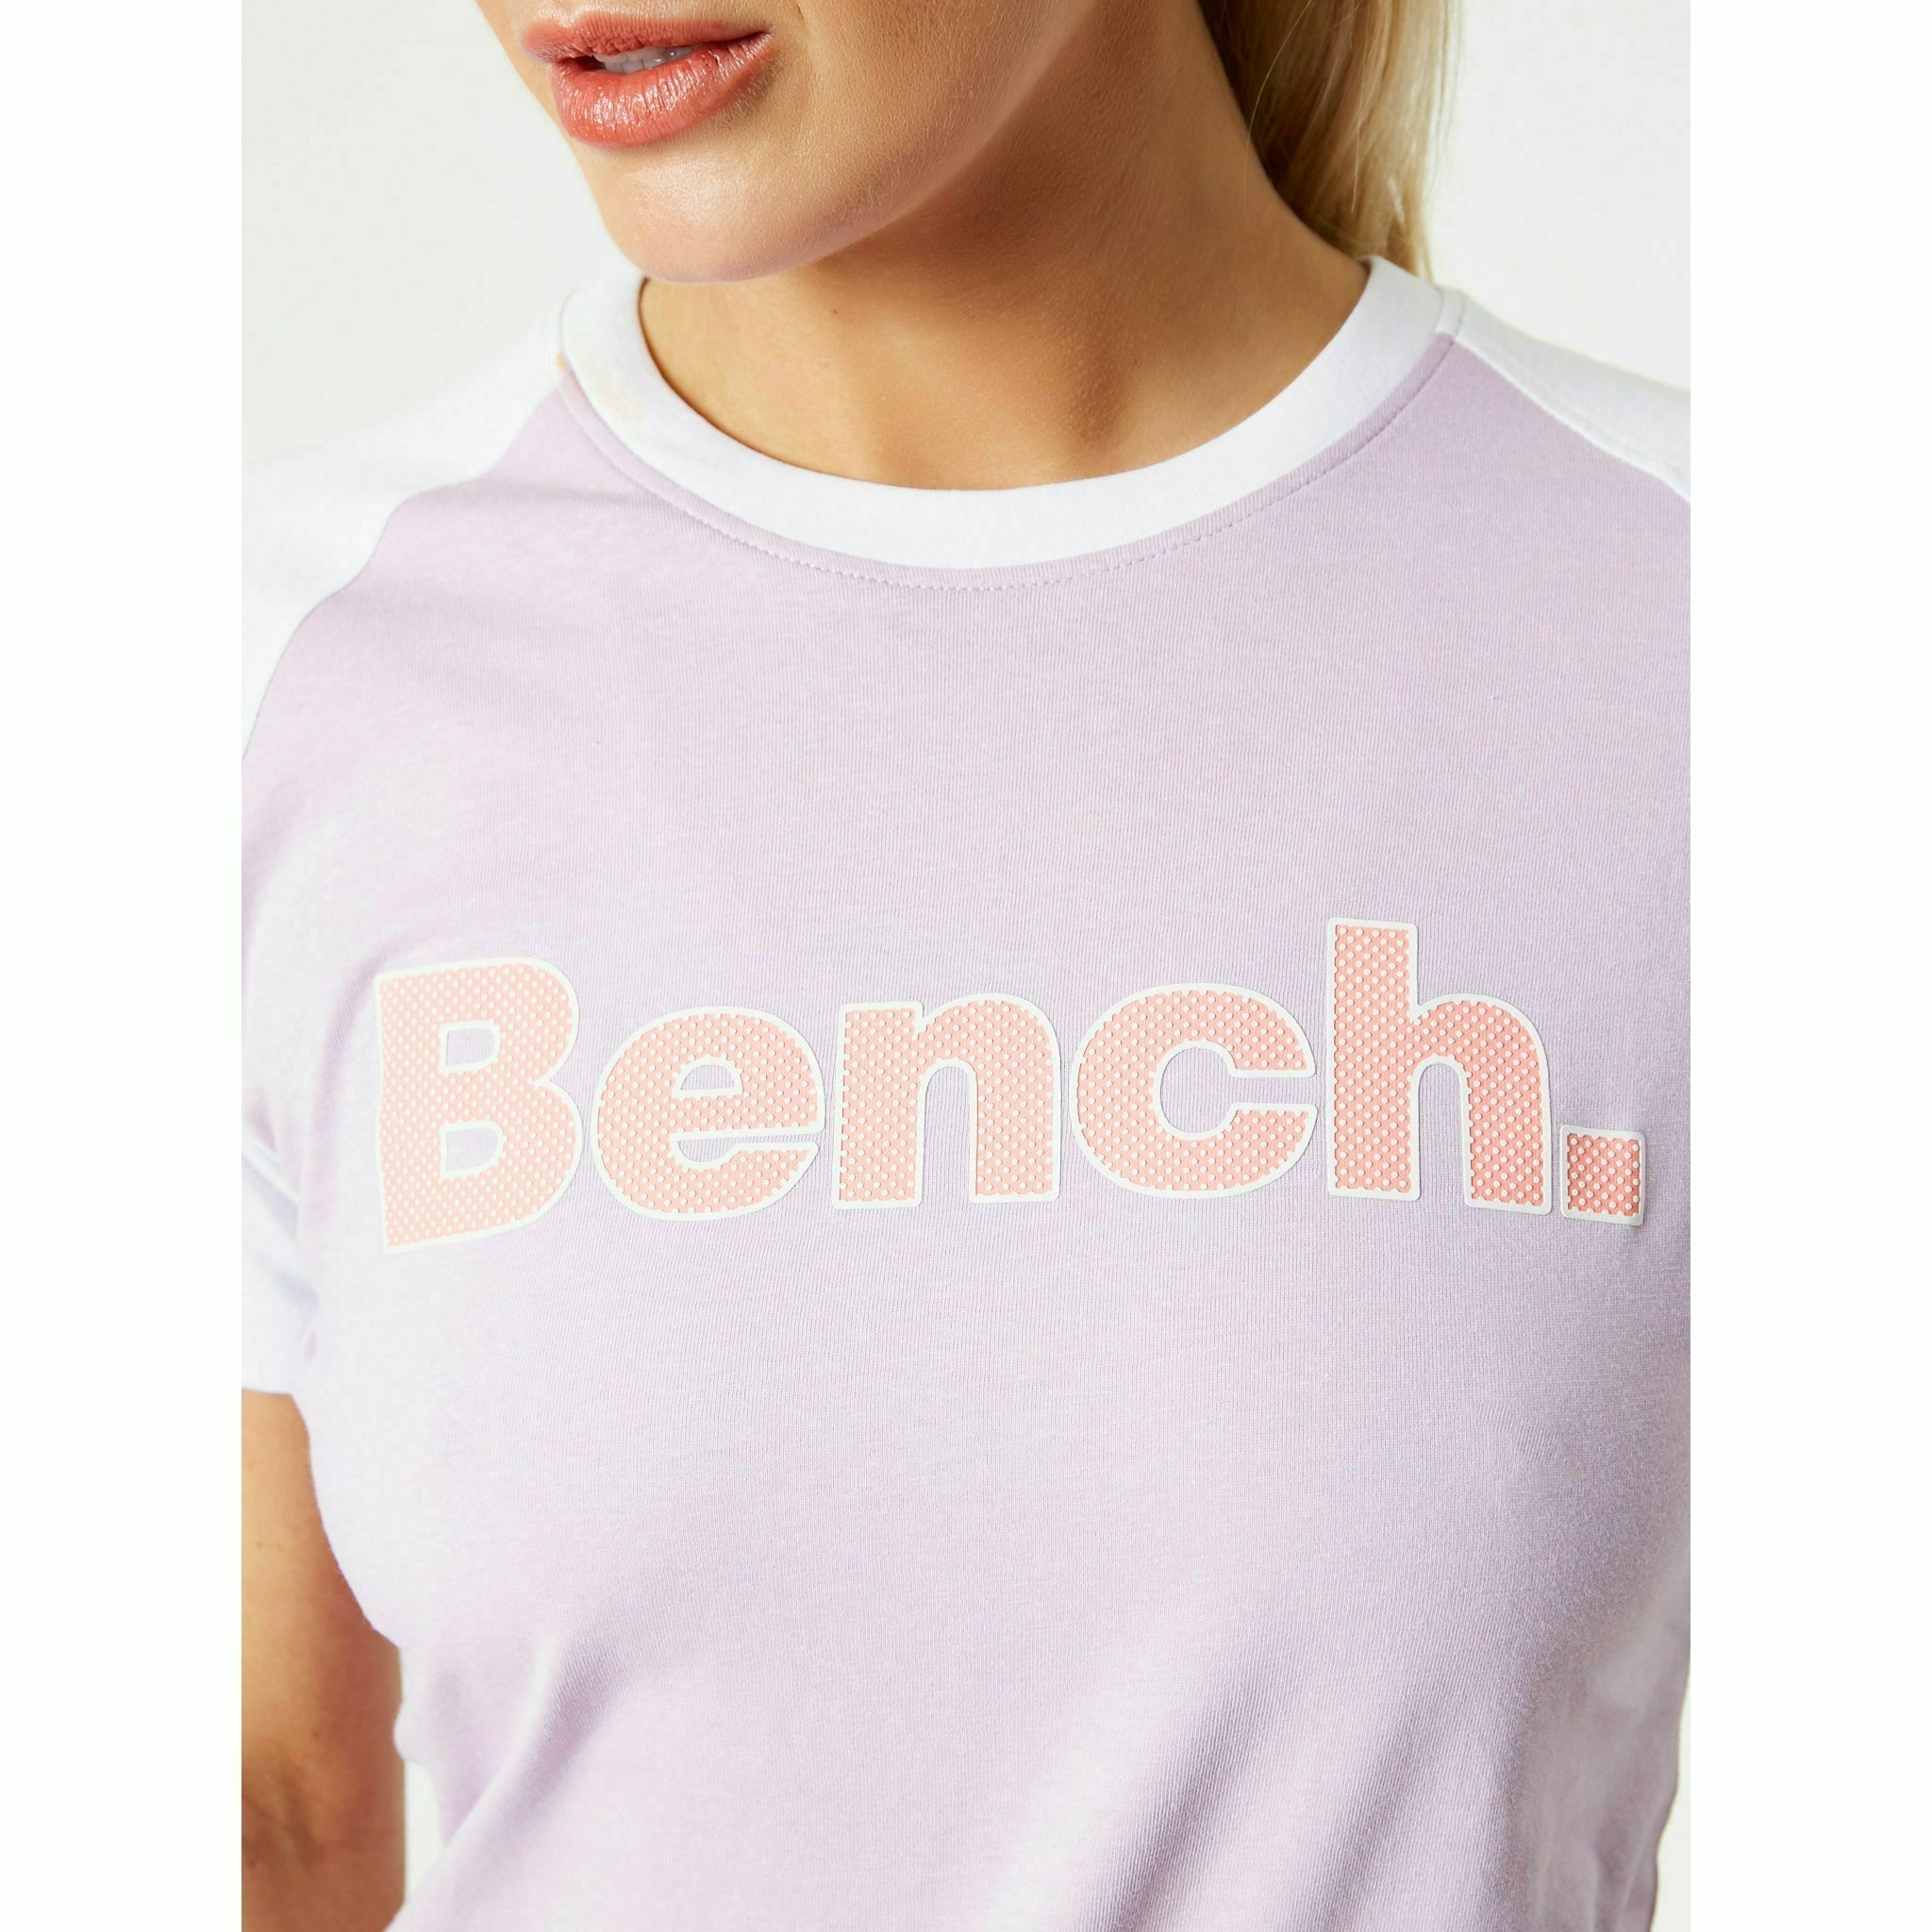 Womens 'SOFIE' 2 Pack T-Shirts - ASSORTED - Shop at www.Bench.co.uk #LoveMyHood